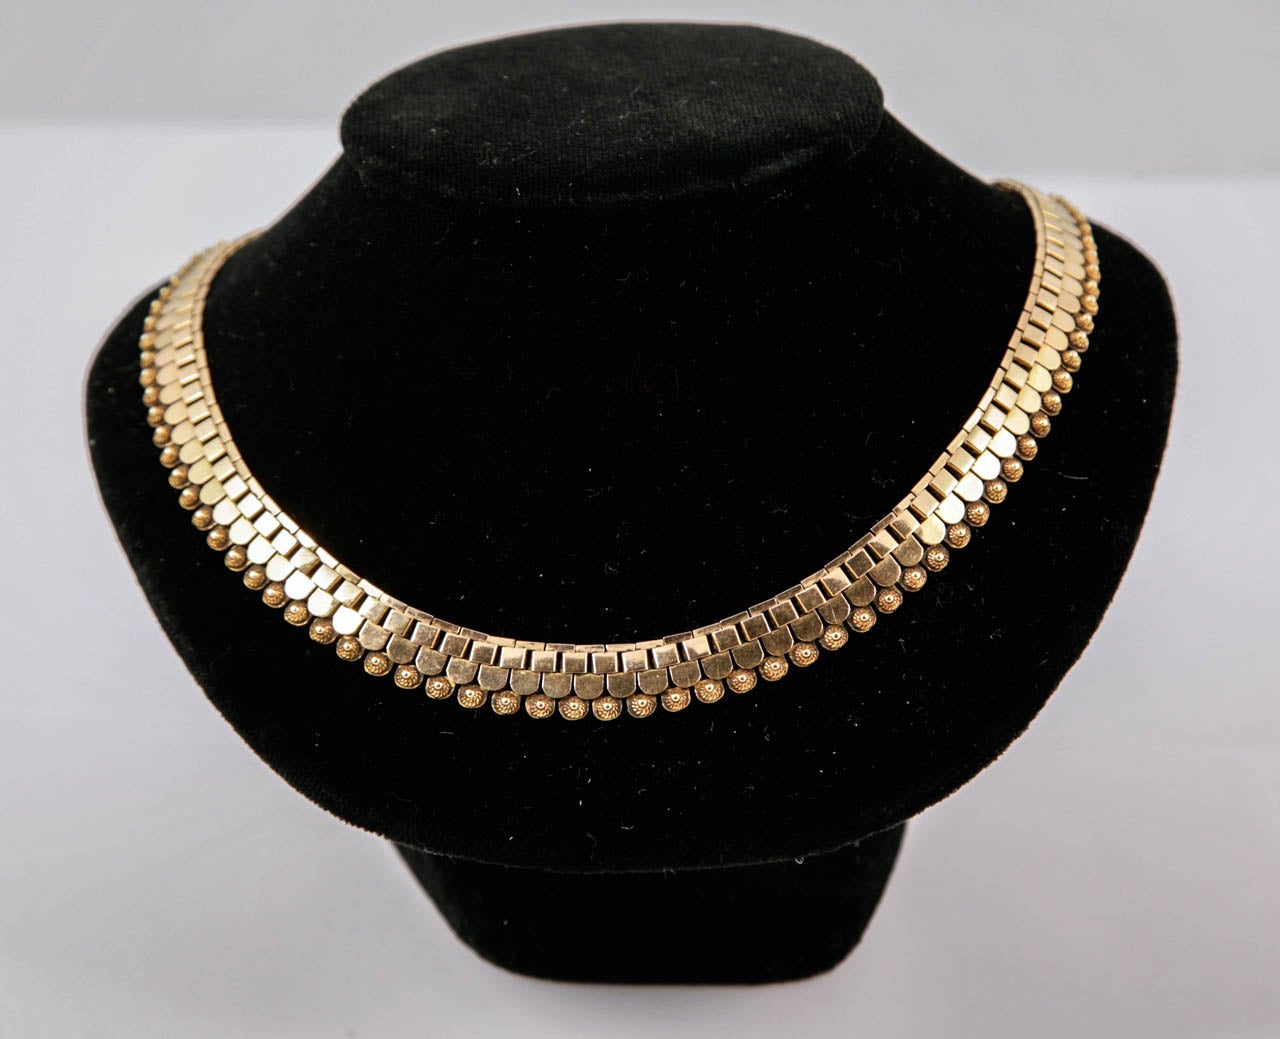 18kt yellow gold collar with French patent marks. It has 2 clasps to enable it to be shortened to a choker.